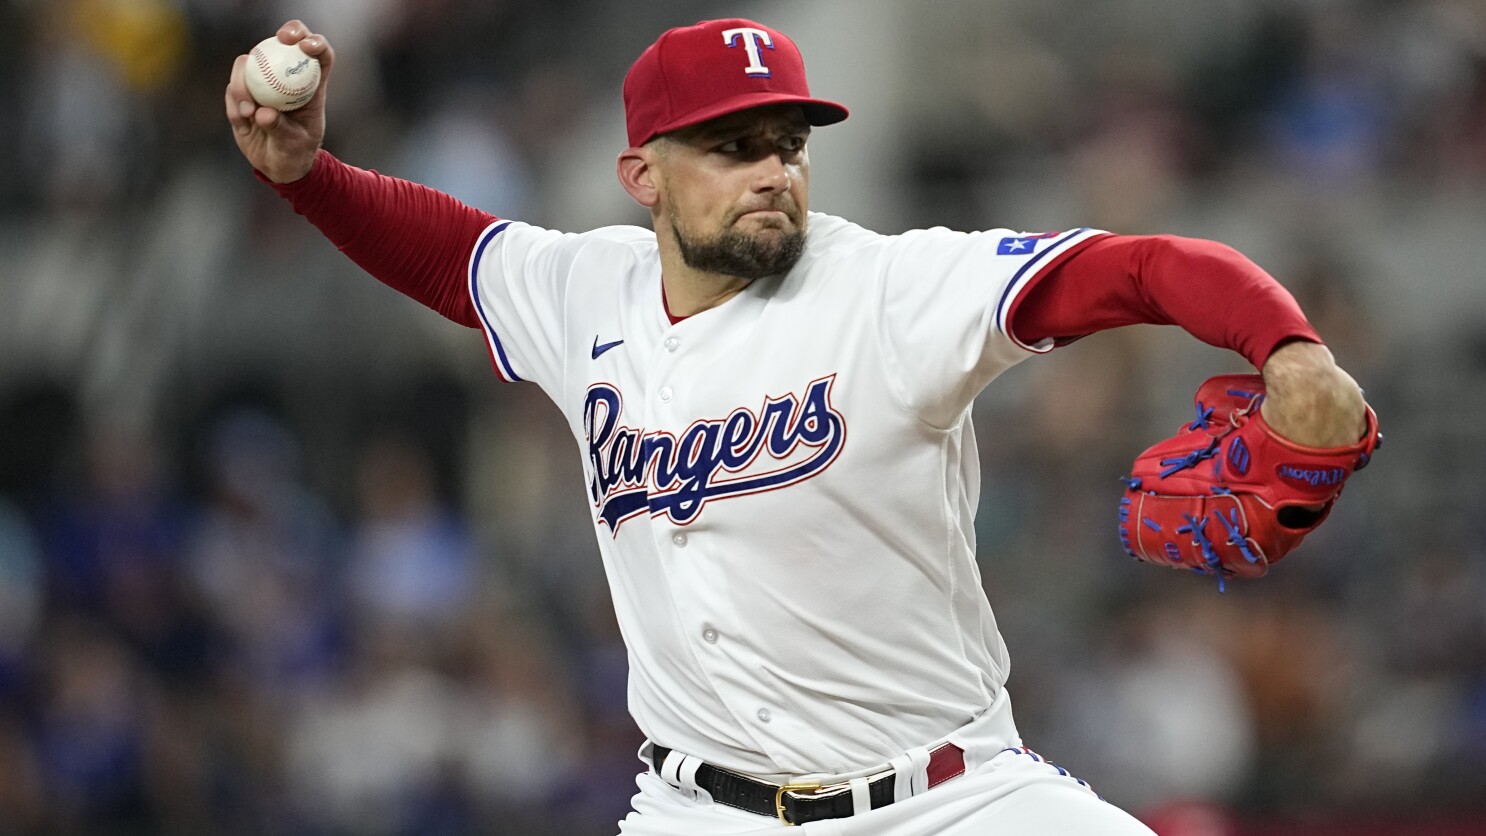 Texas Rangers Make Final Roster Moves Ahead of Opening Day